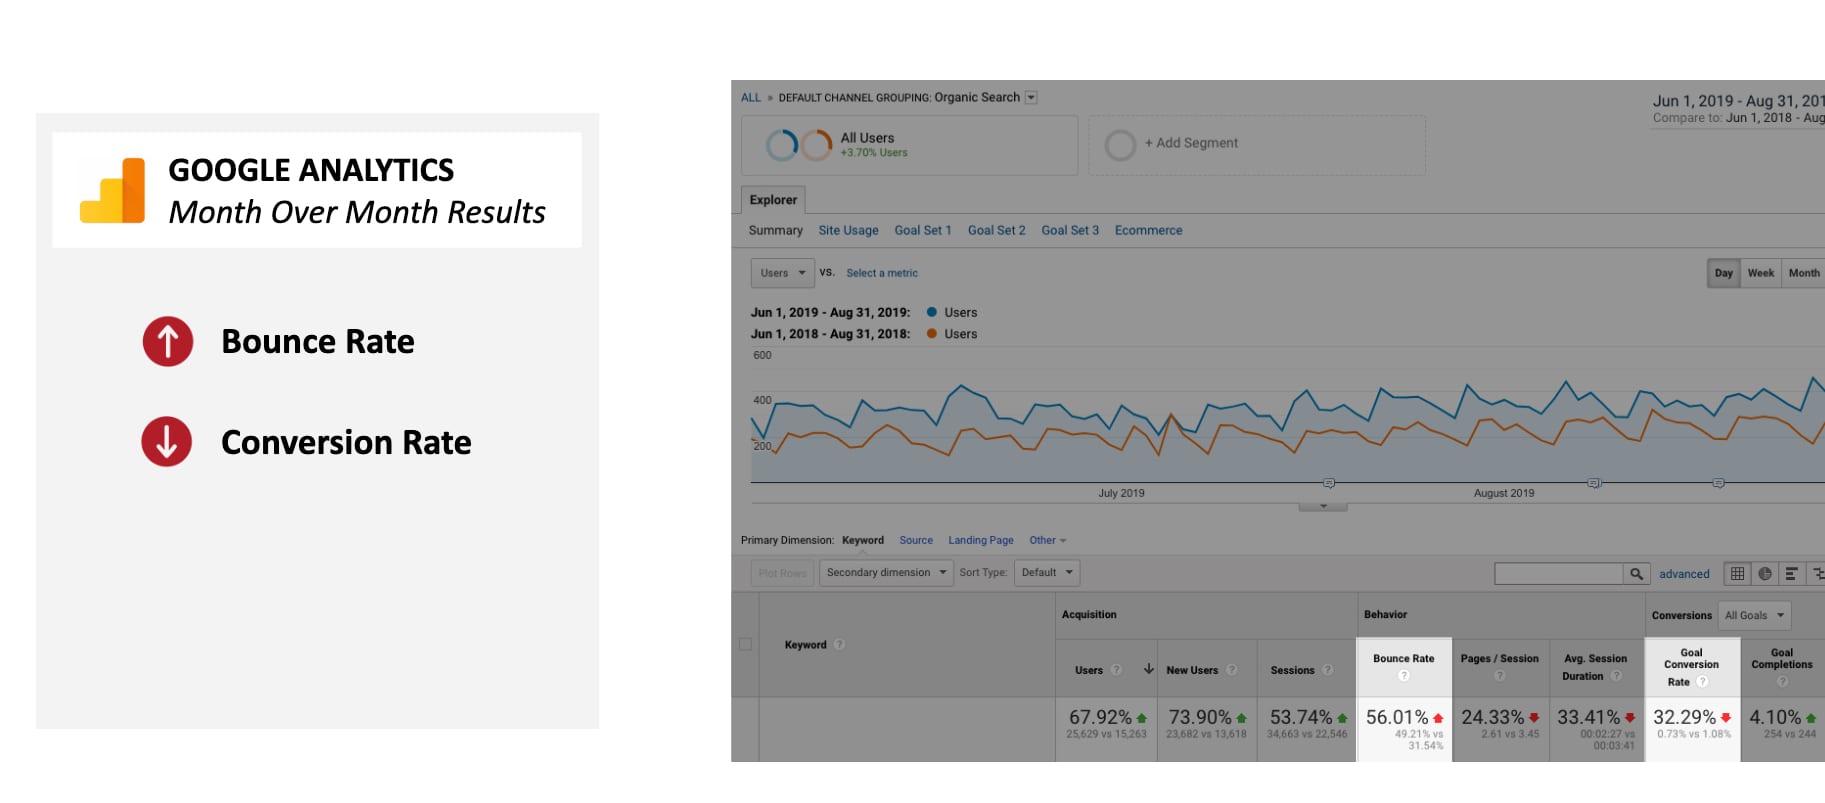 Bounce Rate Up and Conversion Rate Down in Google Analytics